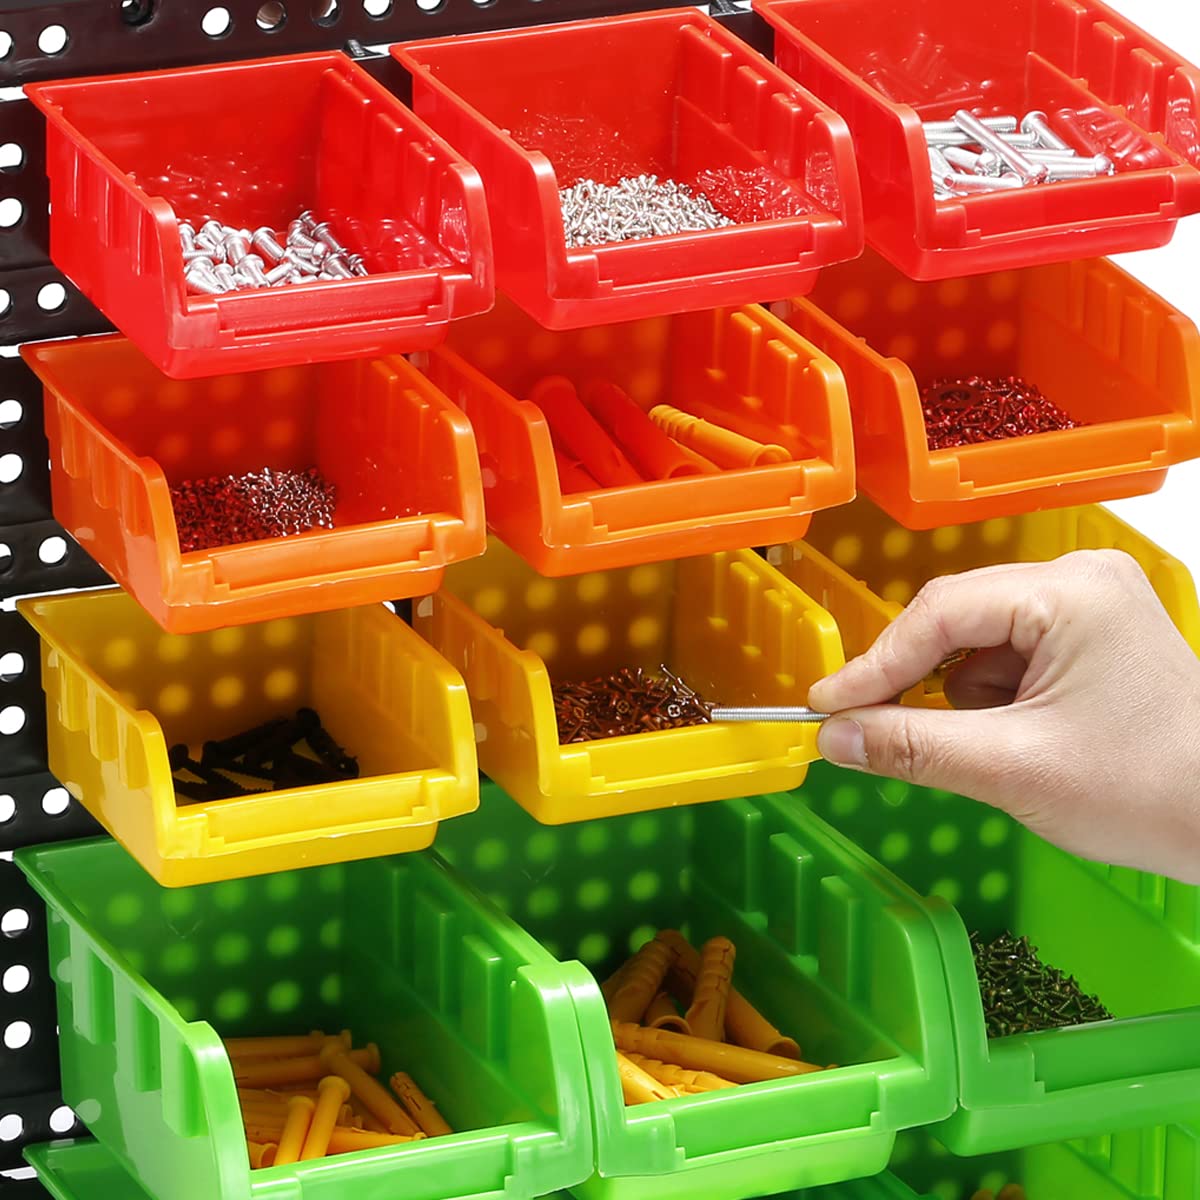 MULSAME Garage Storage Bins With Pegboard, Wall Mounted Parts Rack with 15PCS Bins Organizer, Stackable Garage Plastic Shop Tool, Garage Organizers for Nuts, Screws, Nails, Beads, Bolts Storage